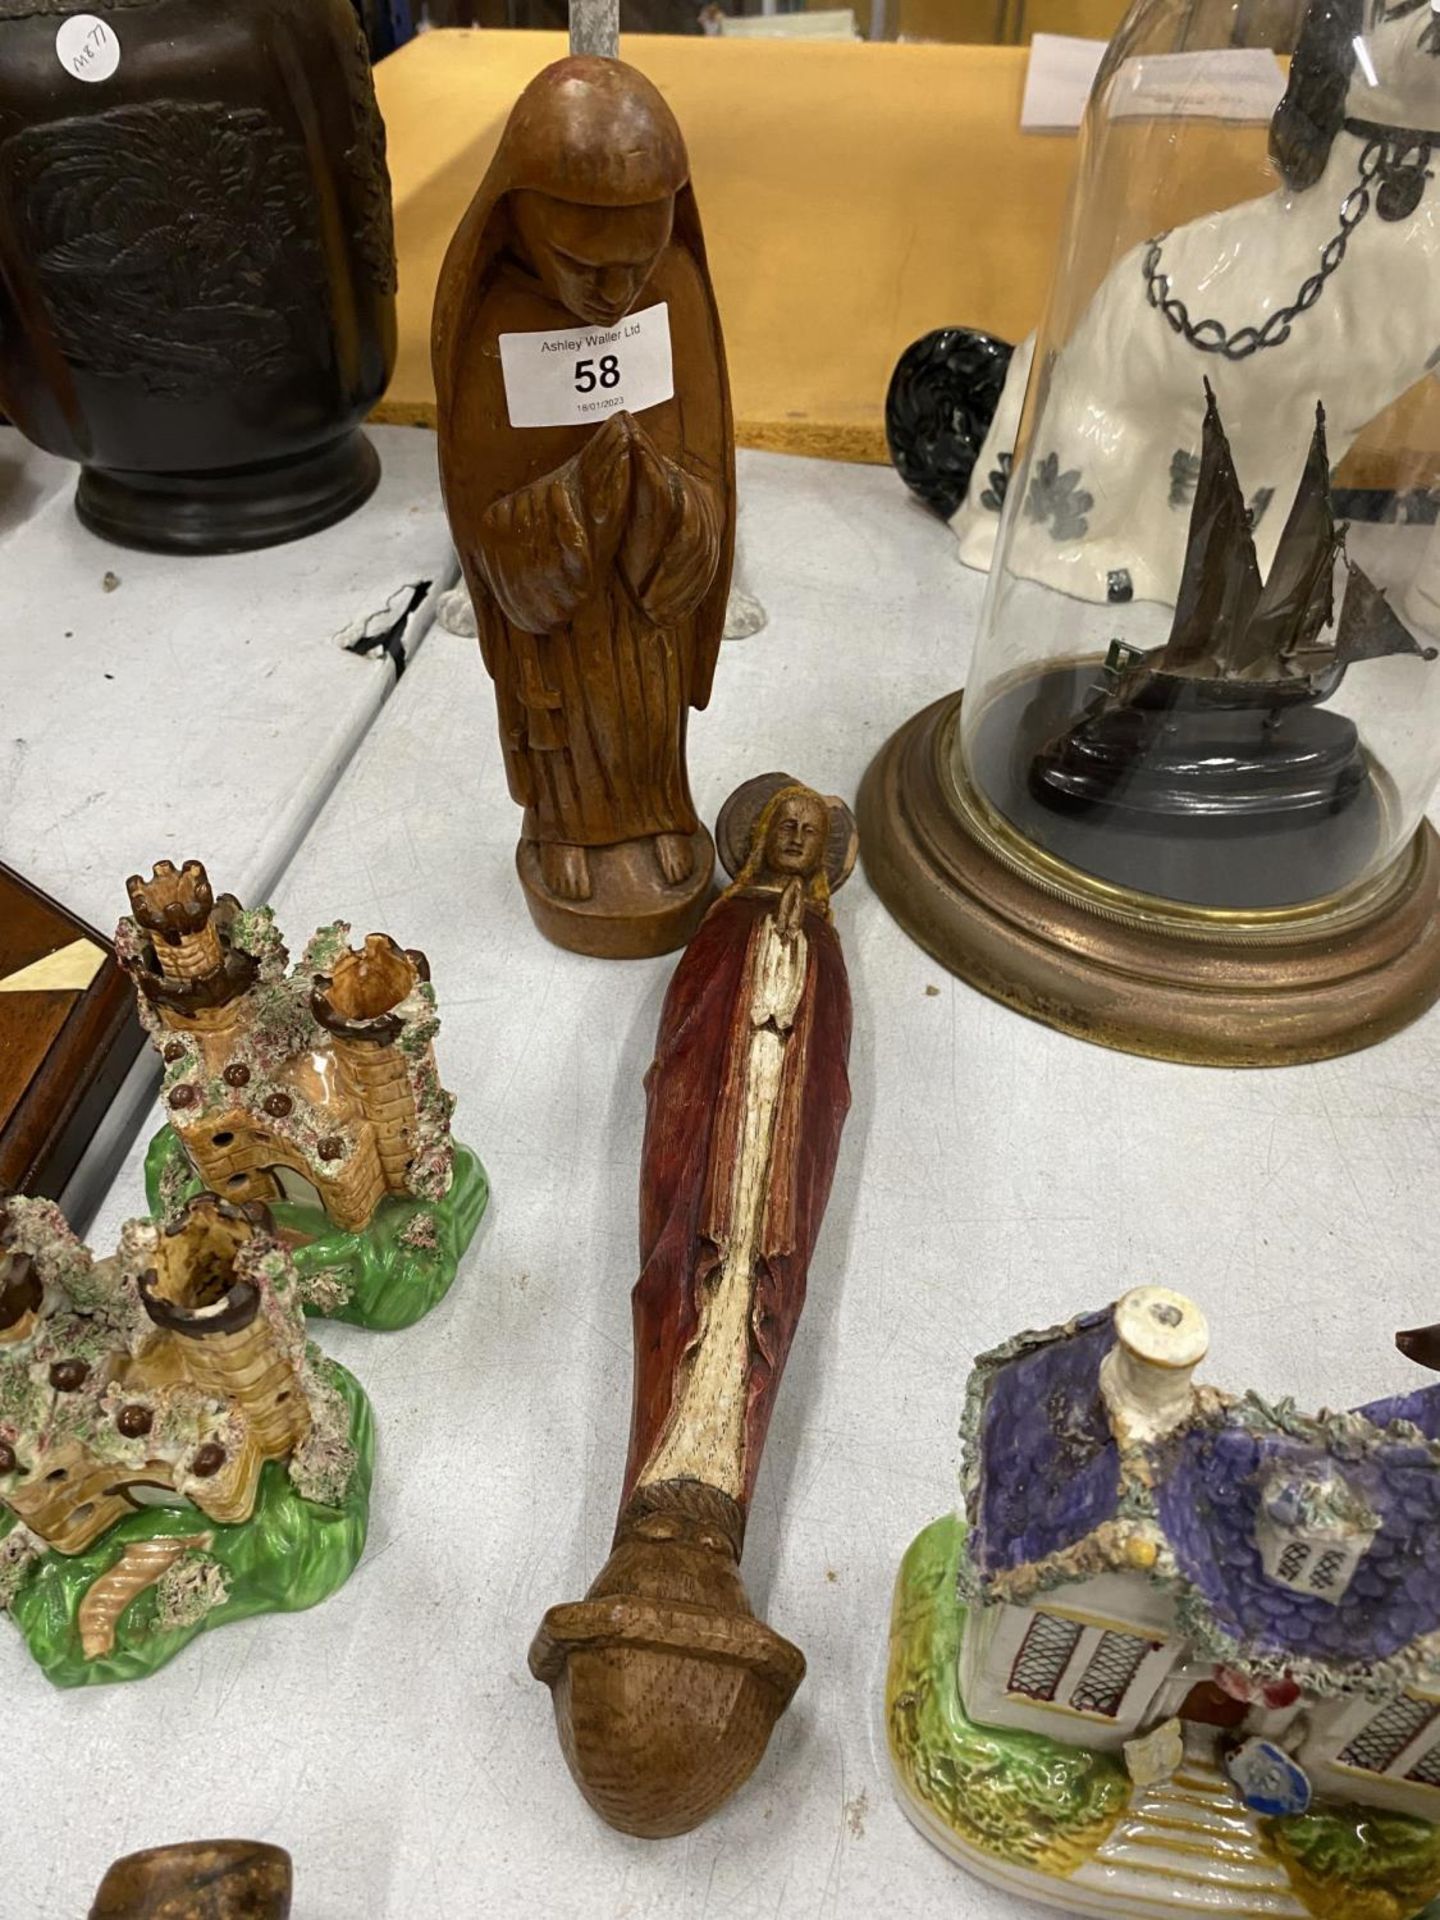 TWO RELIGIOUS CARVED WOODEN ITEMS - PRAYING MAN & JESUS MODEL